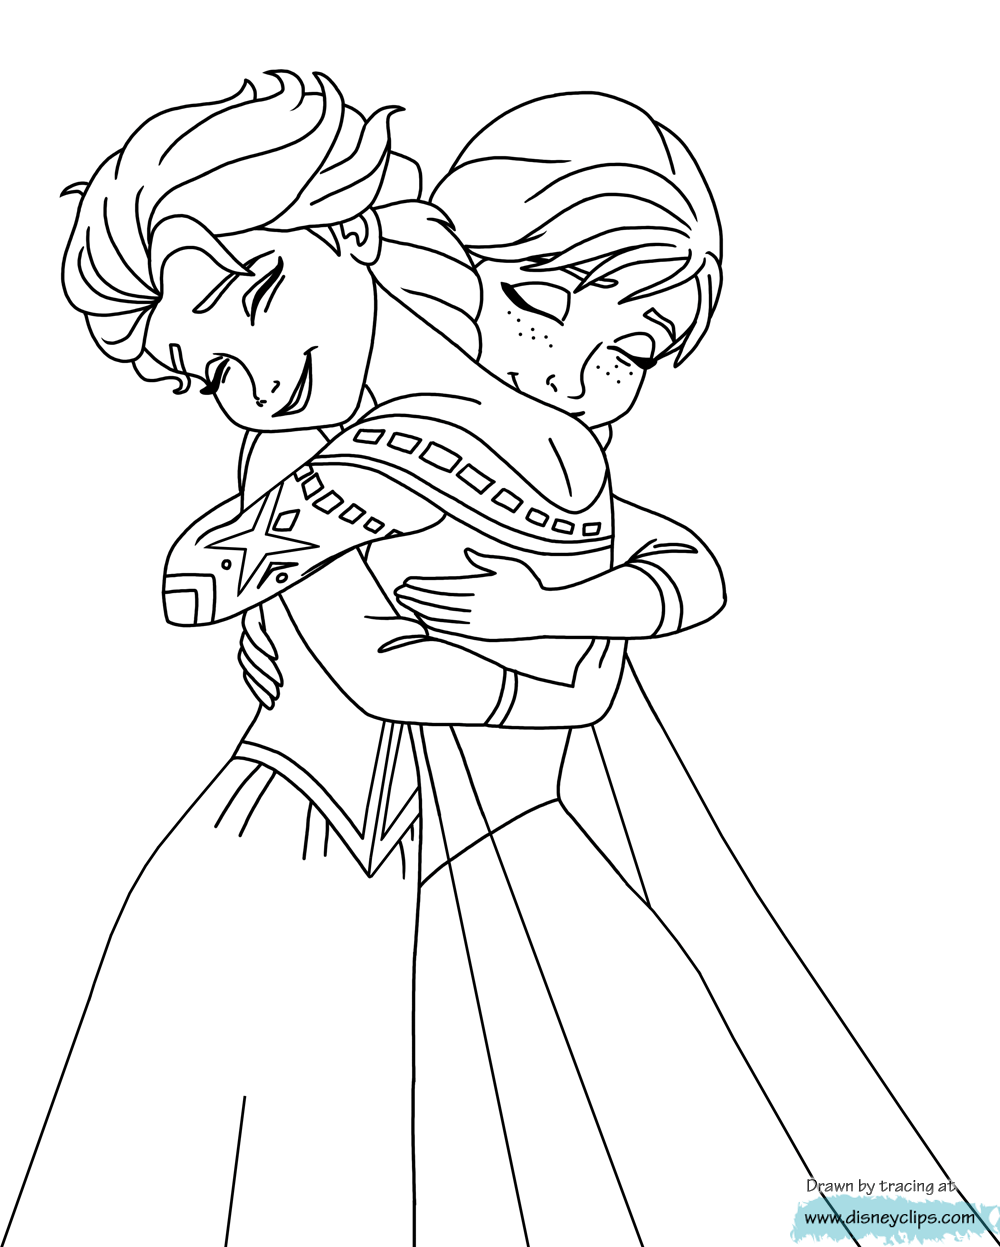 Free Printable Elsa Coloring Pages, Sheets and Pictures for Adults and Kids,  Girls and Boys - WriteOnCon.com